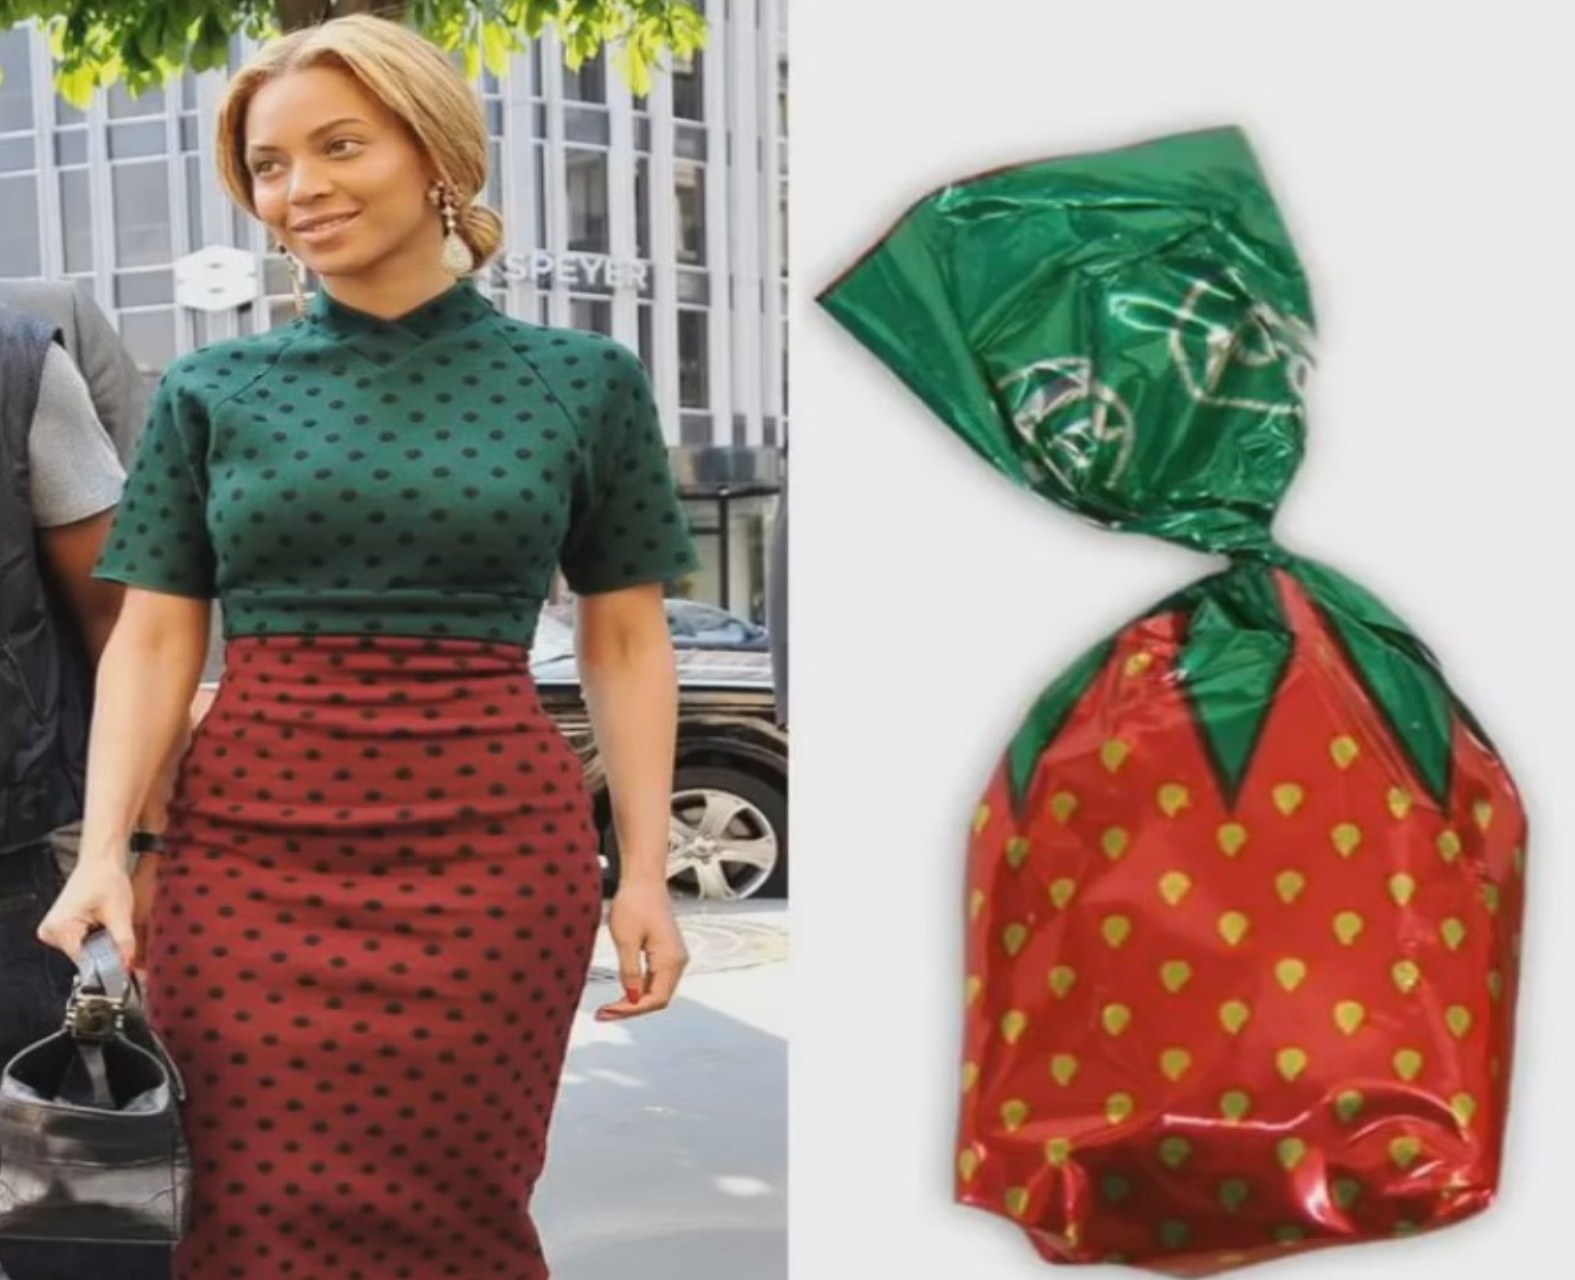 just for laughs - Who Wore It Better